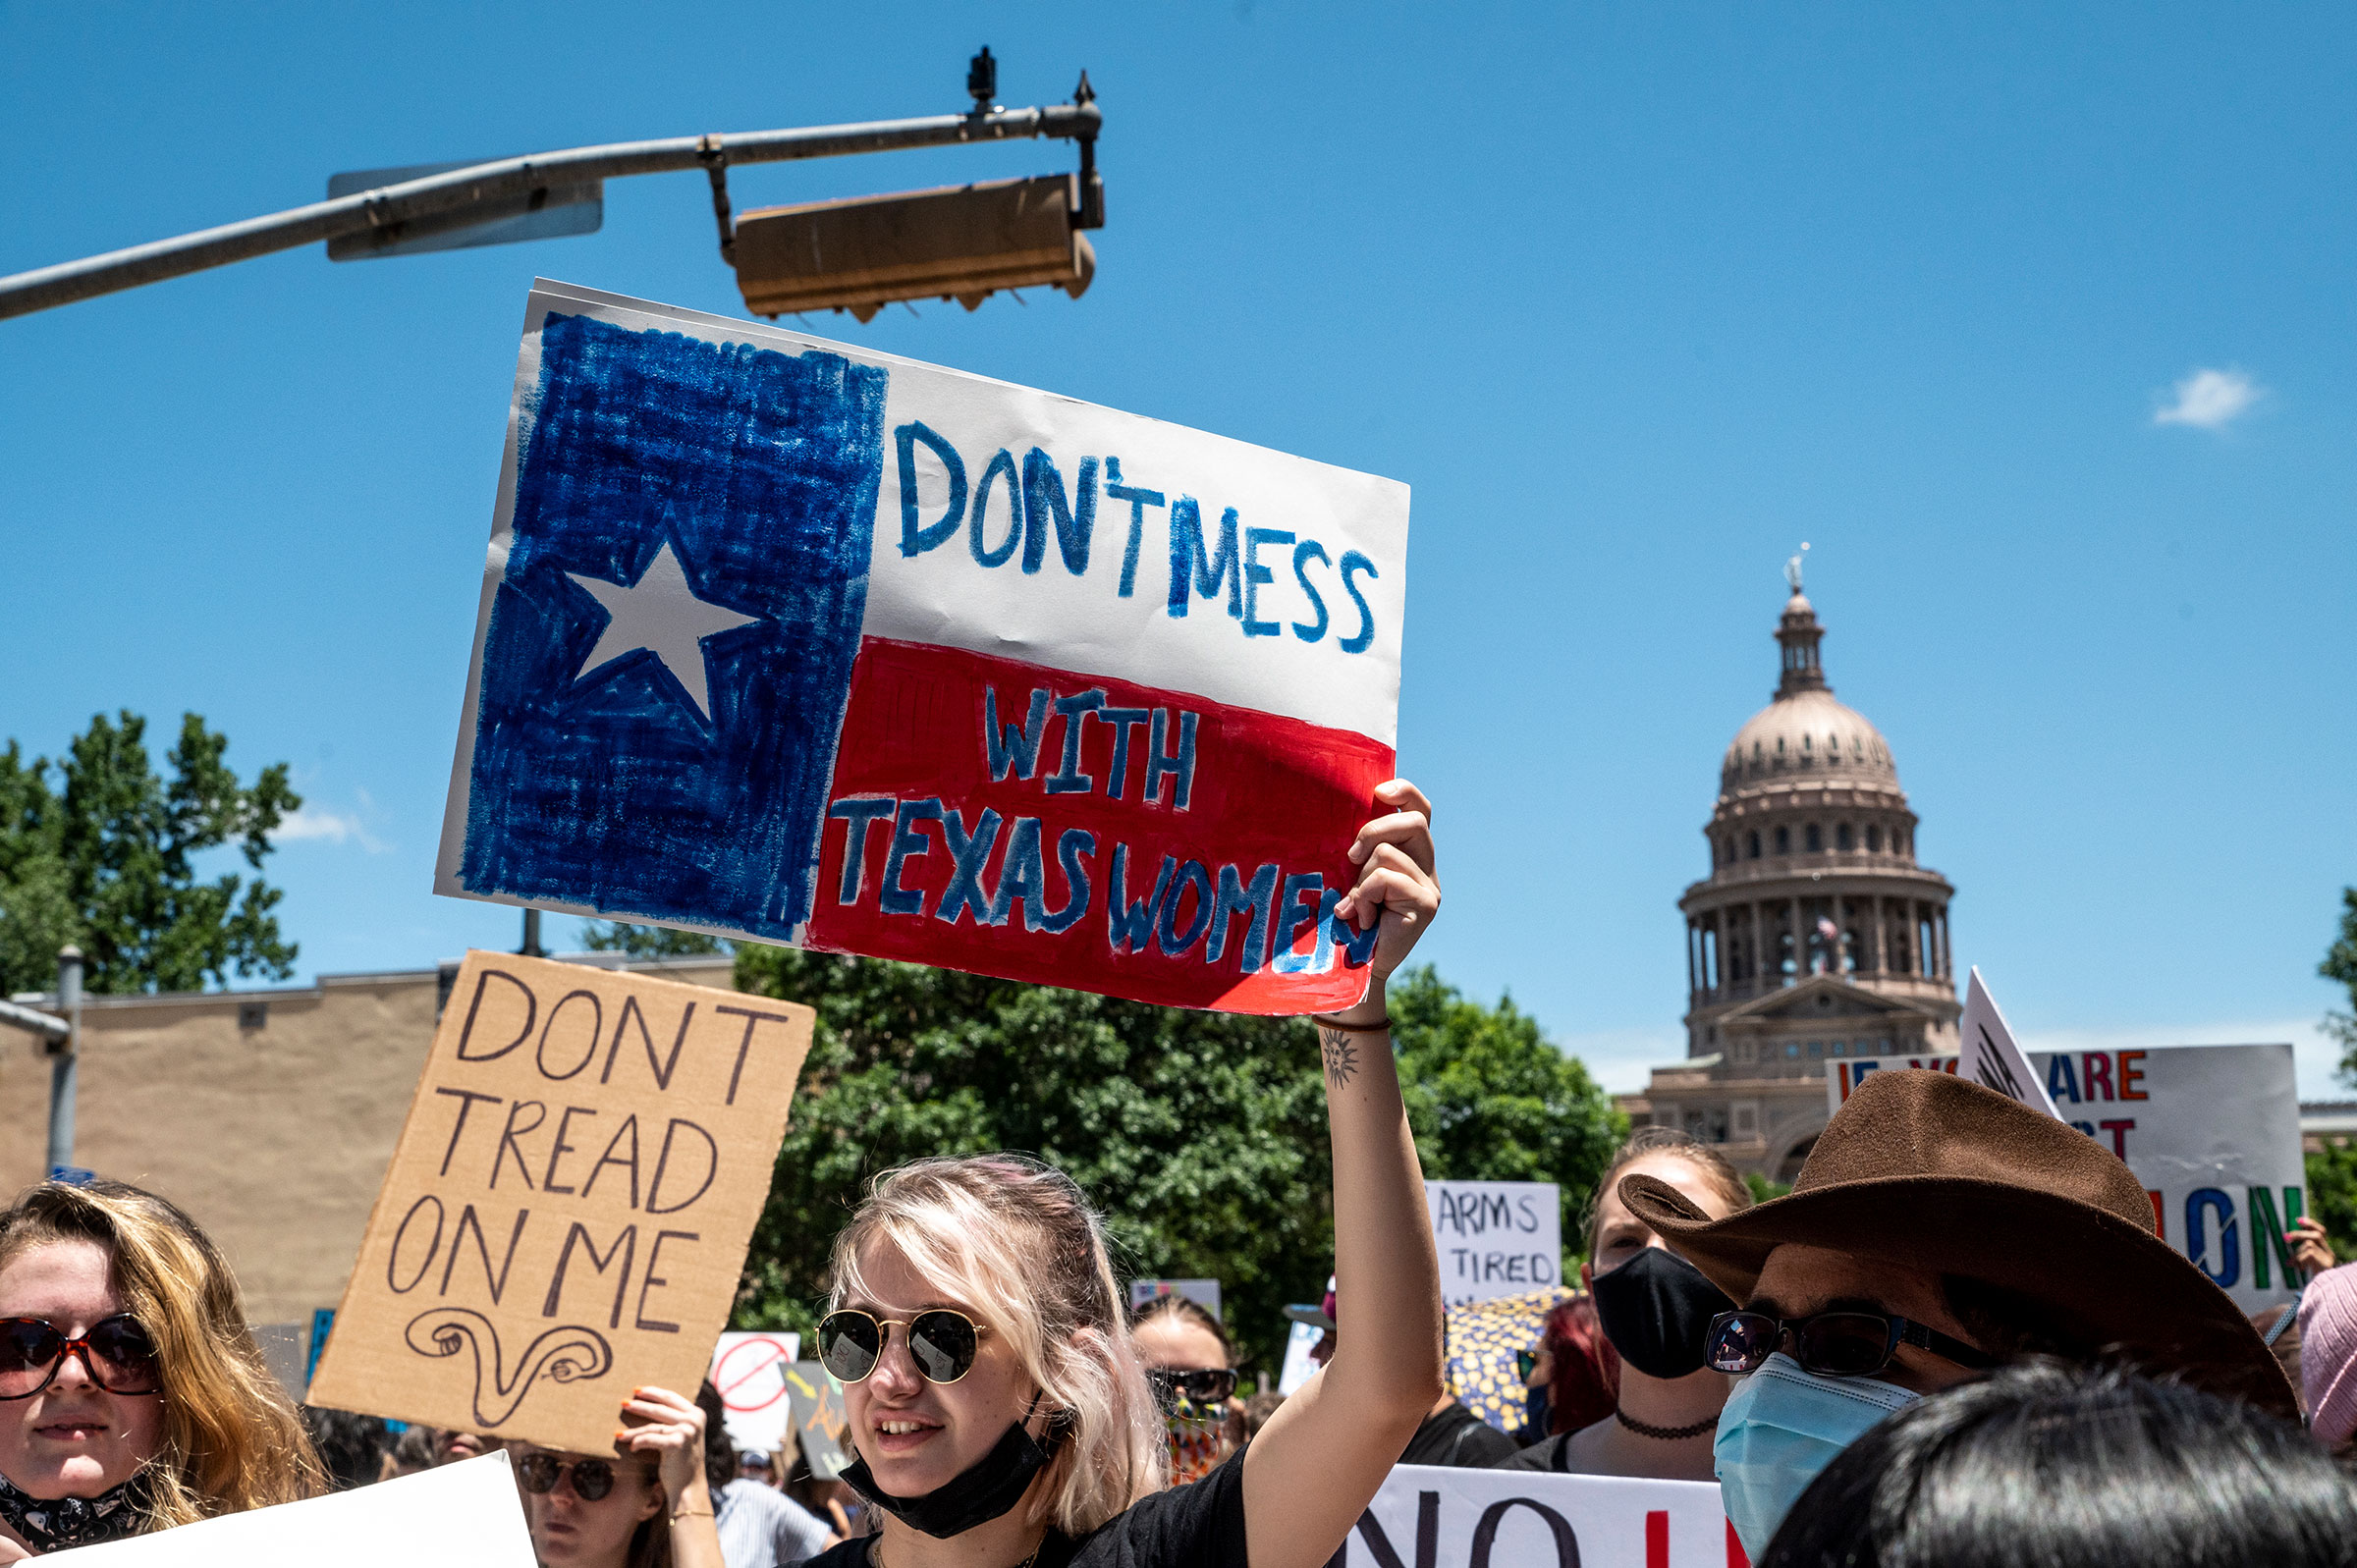 Protesters hold up signs as they march down Congress Ave at a protest outside the Texas state capitol in Austin on May 29, 2021. (Sergio Flores—Getty Images)